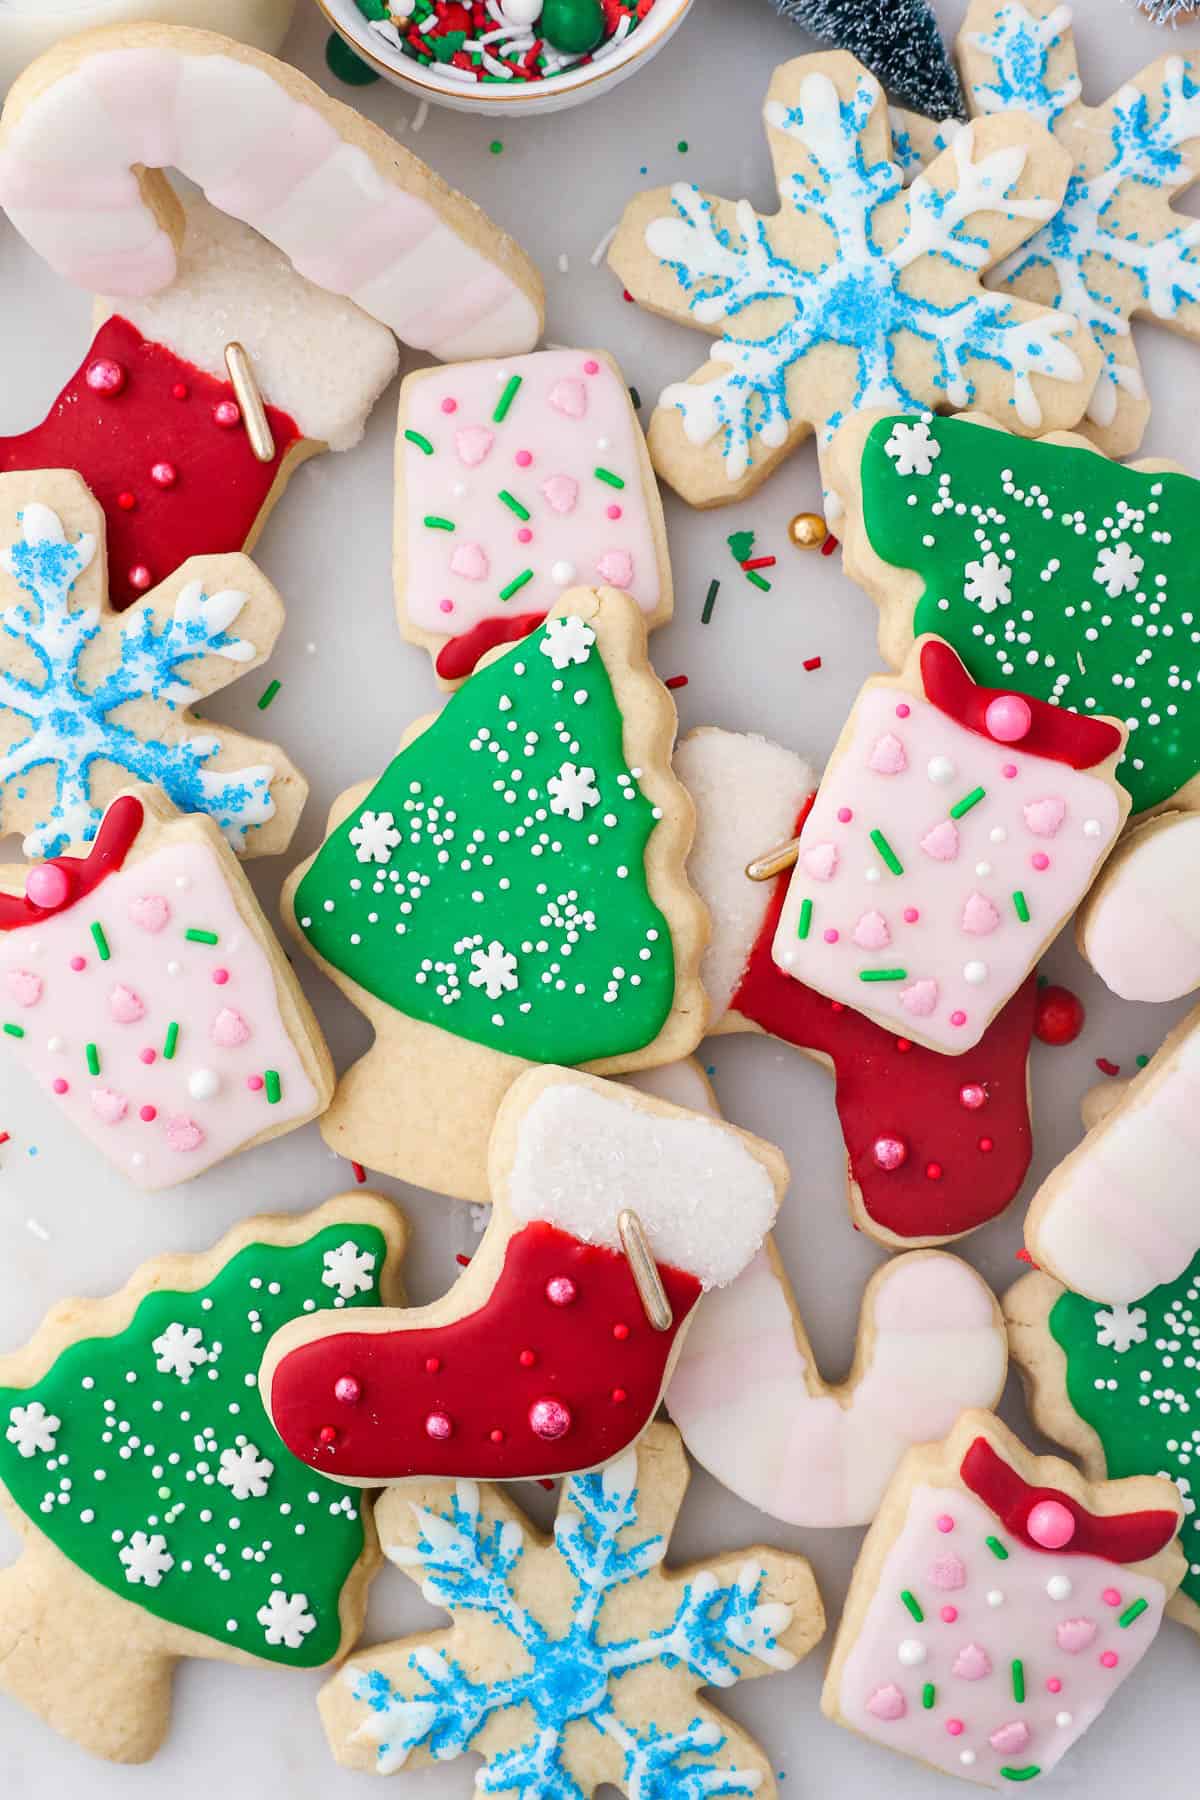 Assorted cut-out Christmas sugar cookies in the shape of stockings, trees, gifts, and snowflakes decorated with sugar cookie icing.